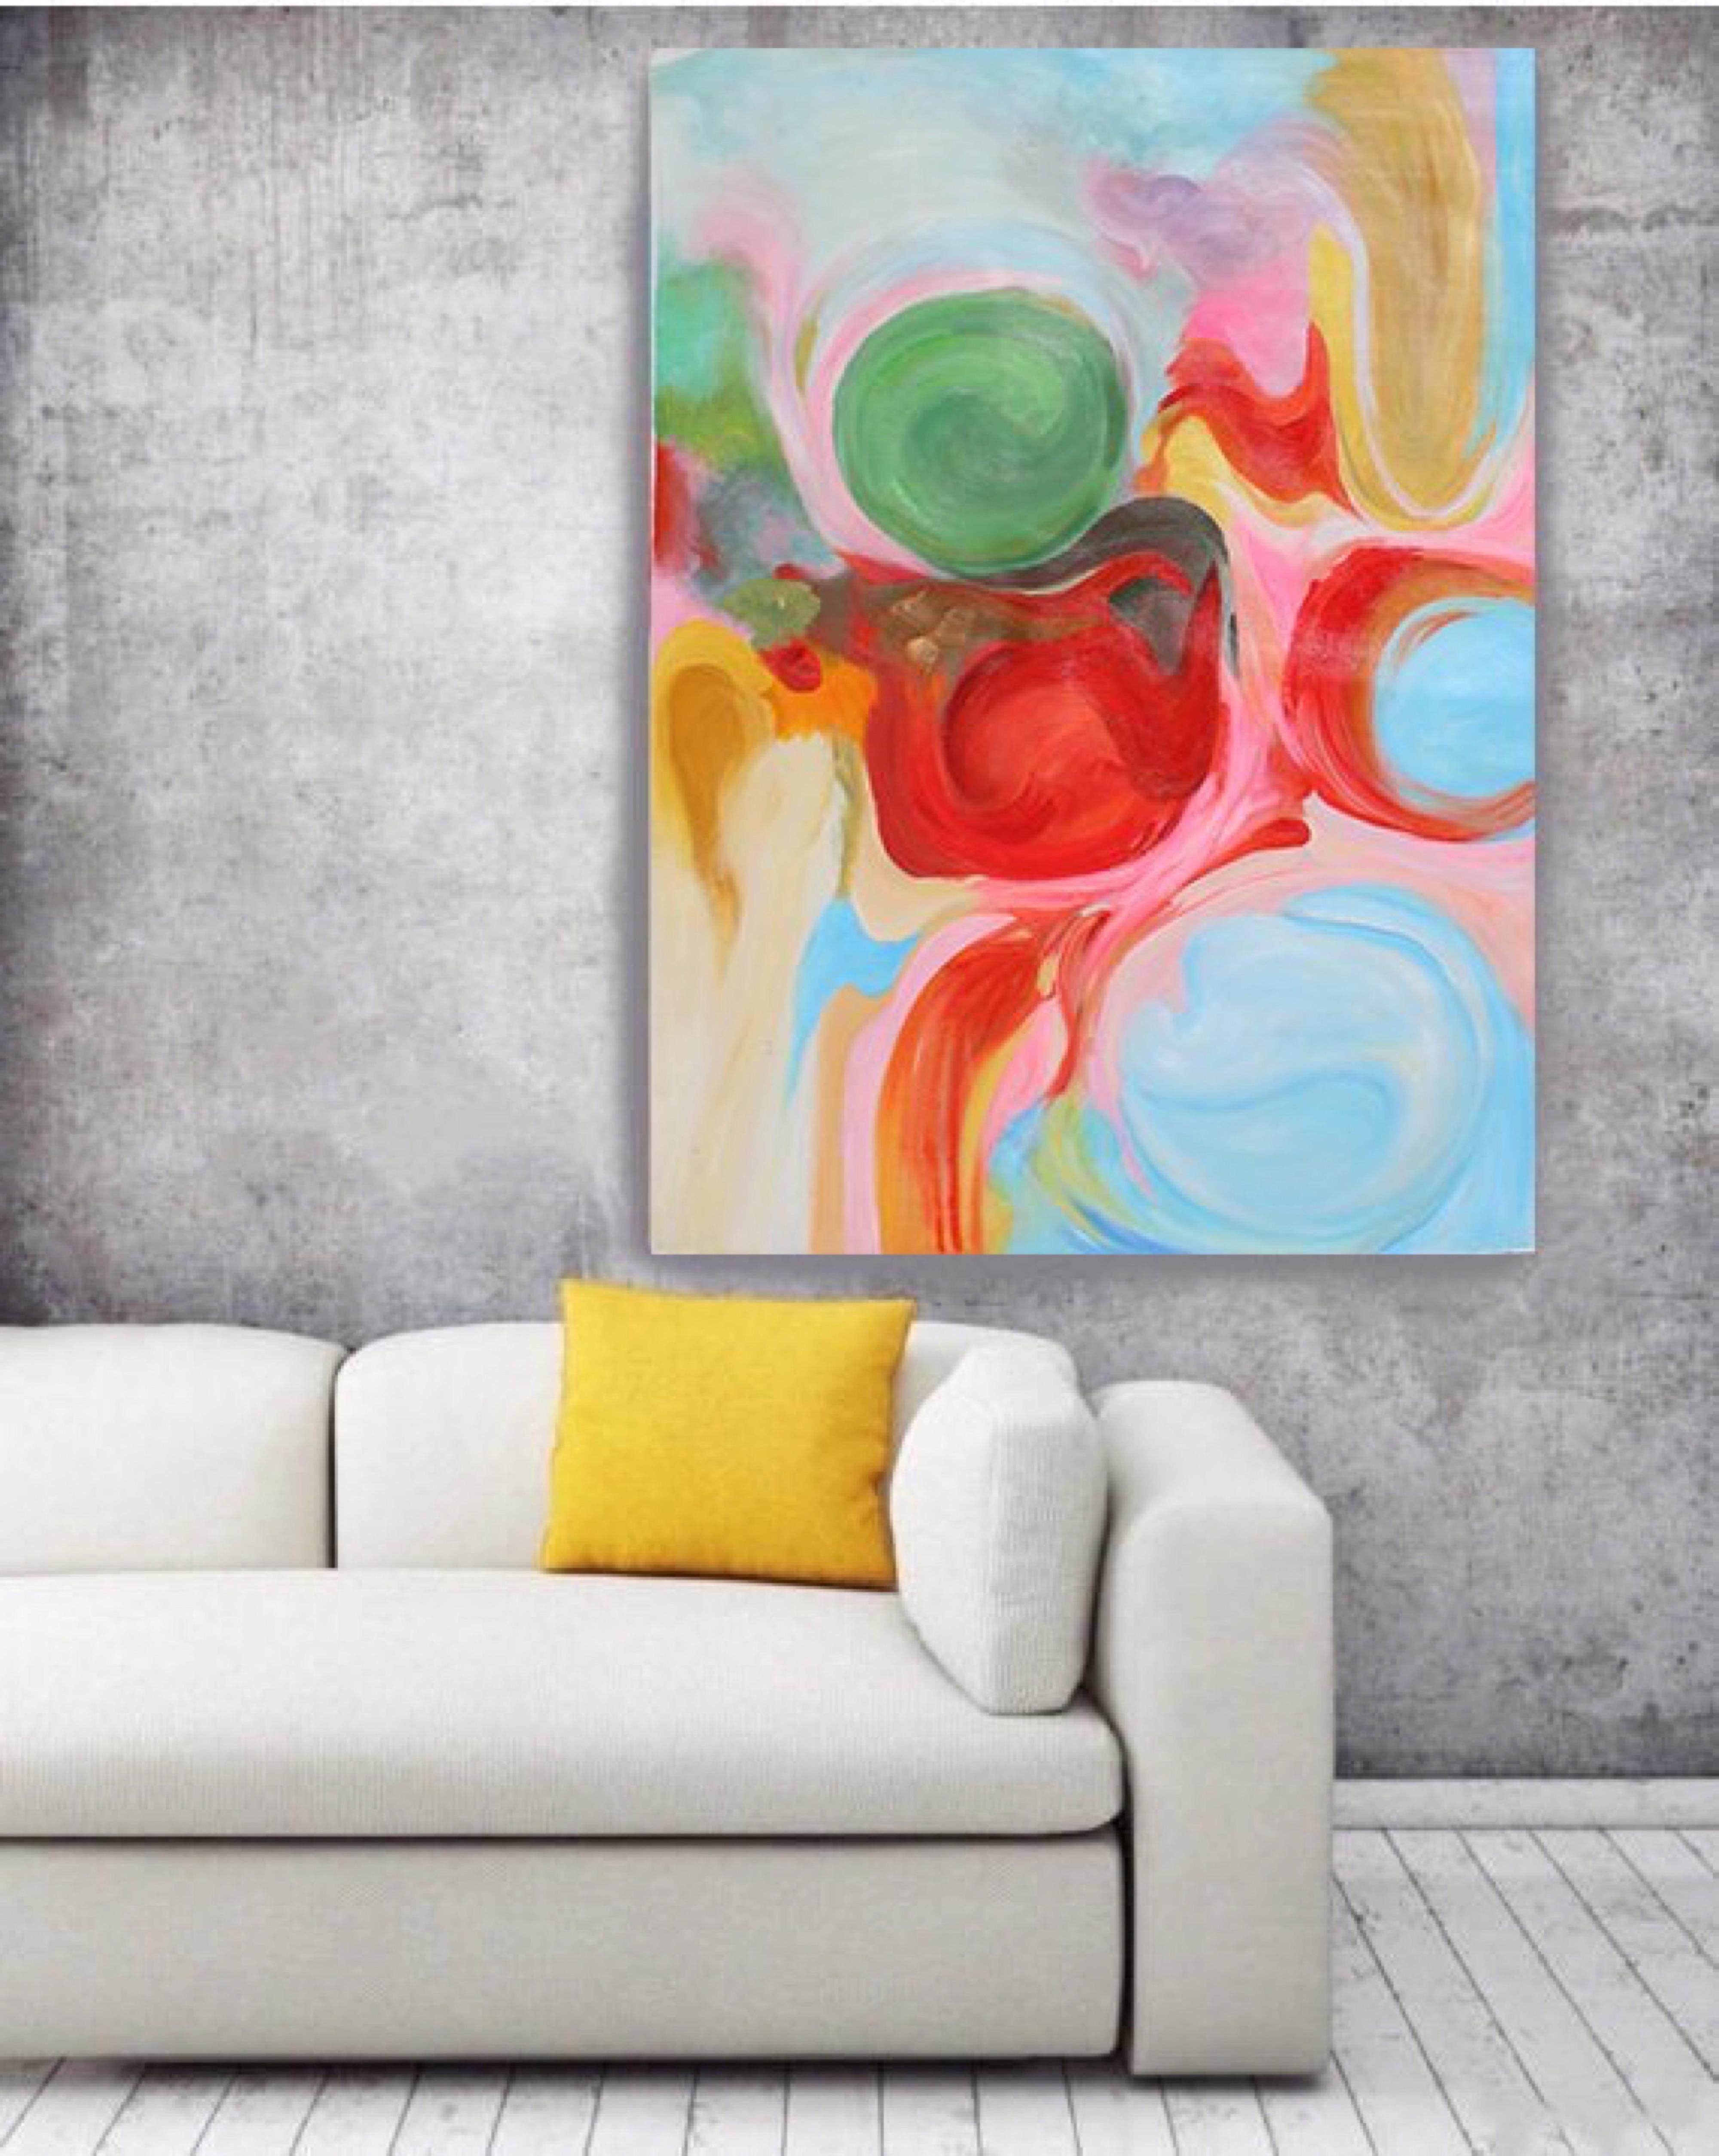 Irena Orlov Interior Painting - Contemporary Abstract Flow Colorful Oil Painting 72H X 48"W, Vivid Dreams